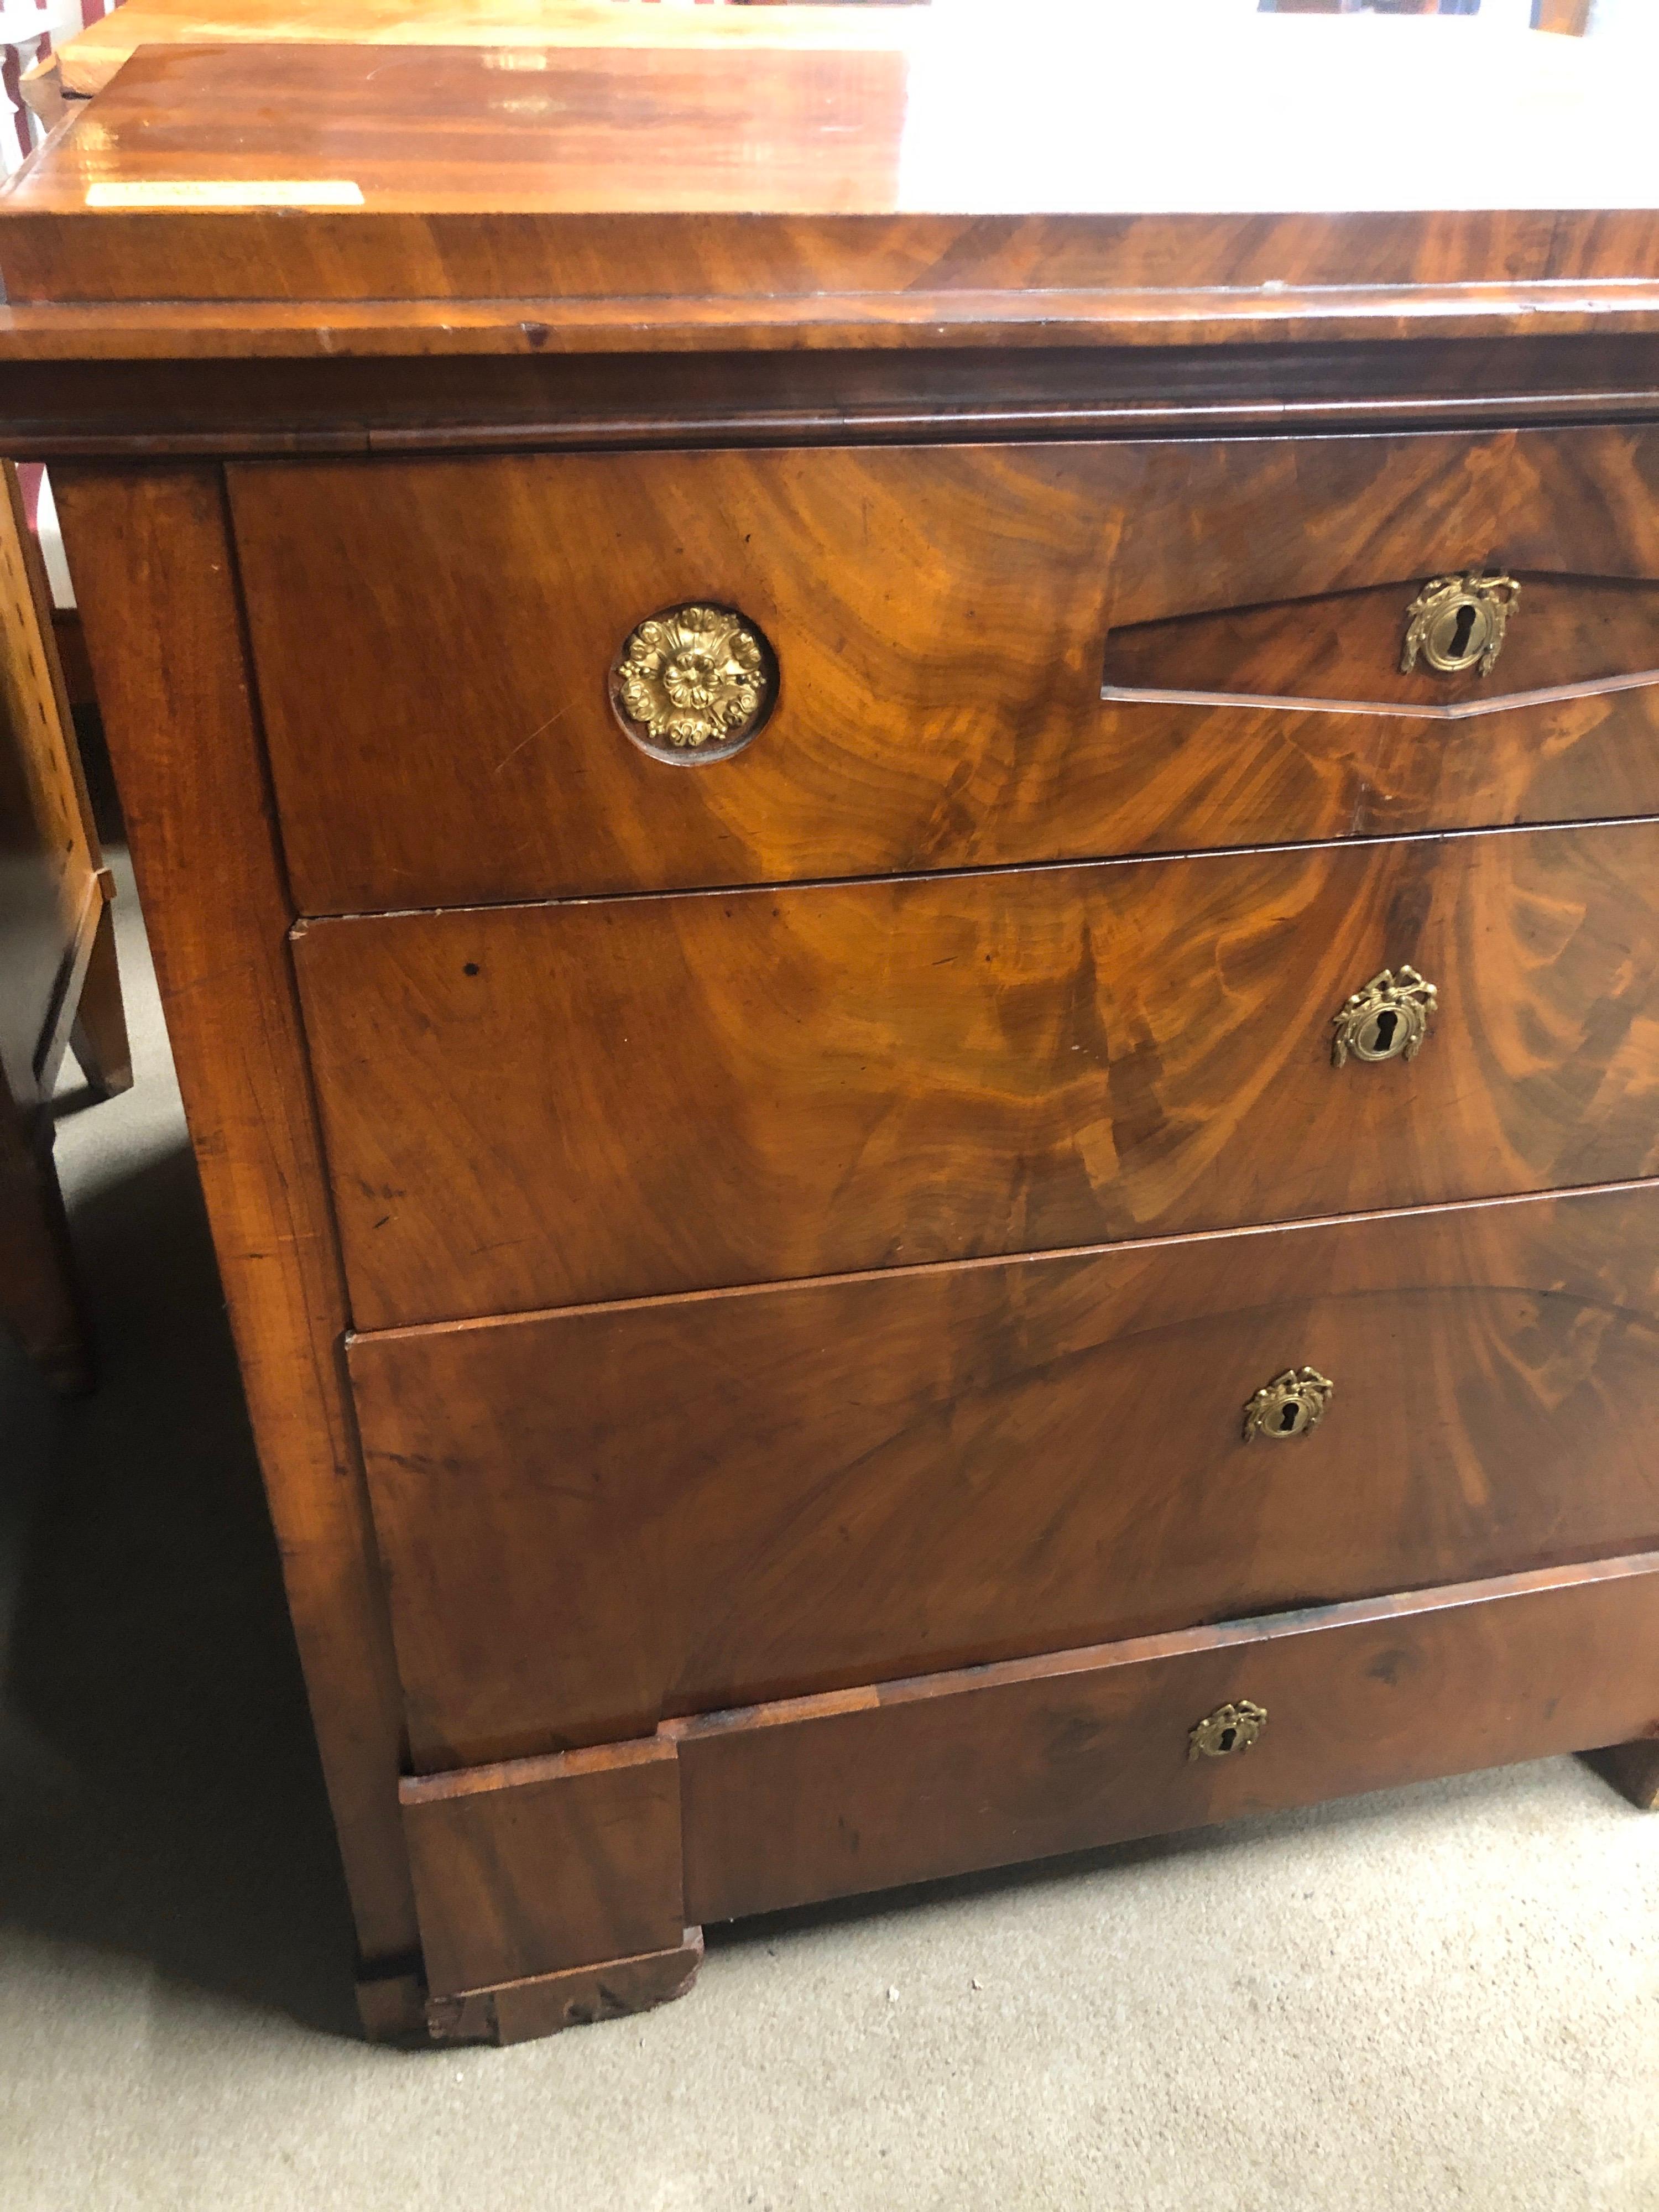 Fantastic Danish chest of drawers, mid-19th century, in mahogany wood with first secretary drawer, in good condition but to be restored.
Essential lines like almost all the Biedermeier production of Northern Europe.
Excellent to be inserted in a